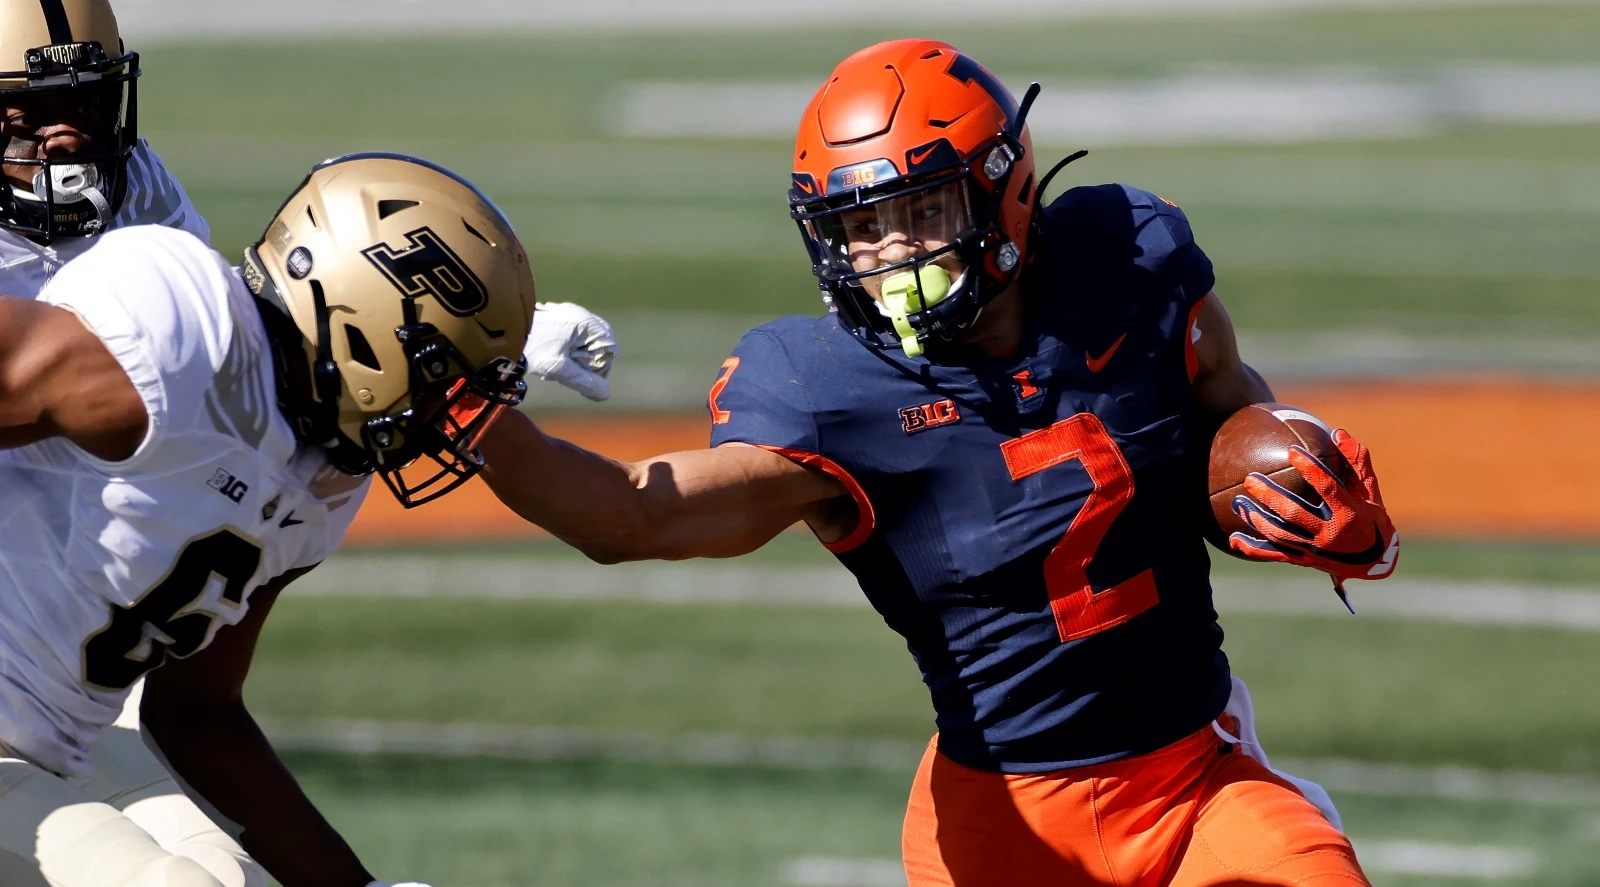 A Quick Look at the Fighting Illini as No. 18 Illinois Continues to Climb  in Both Polls